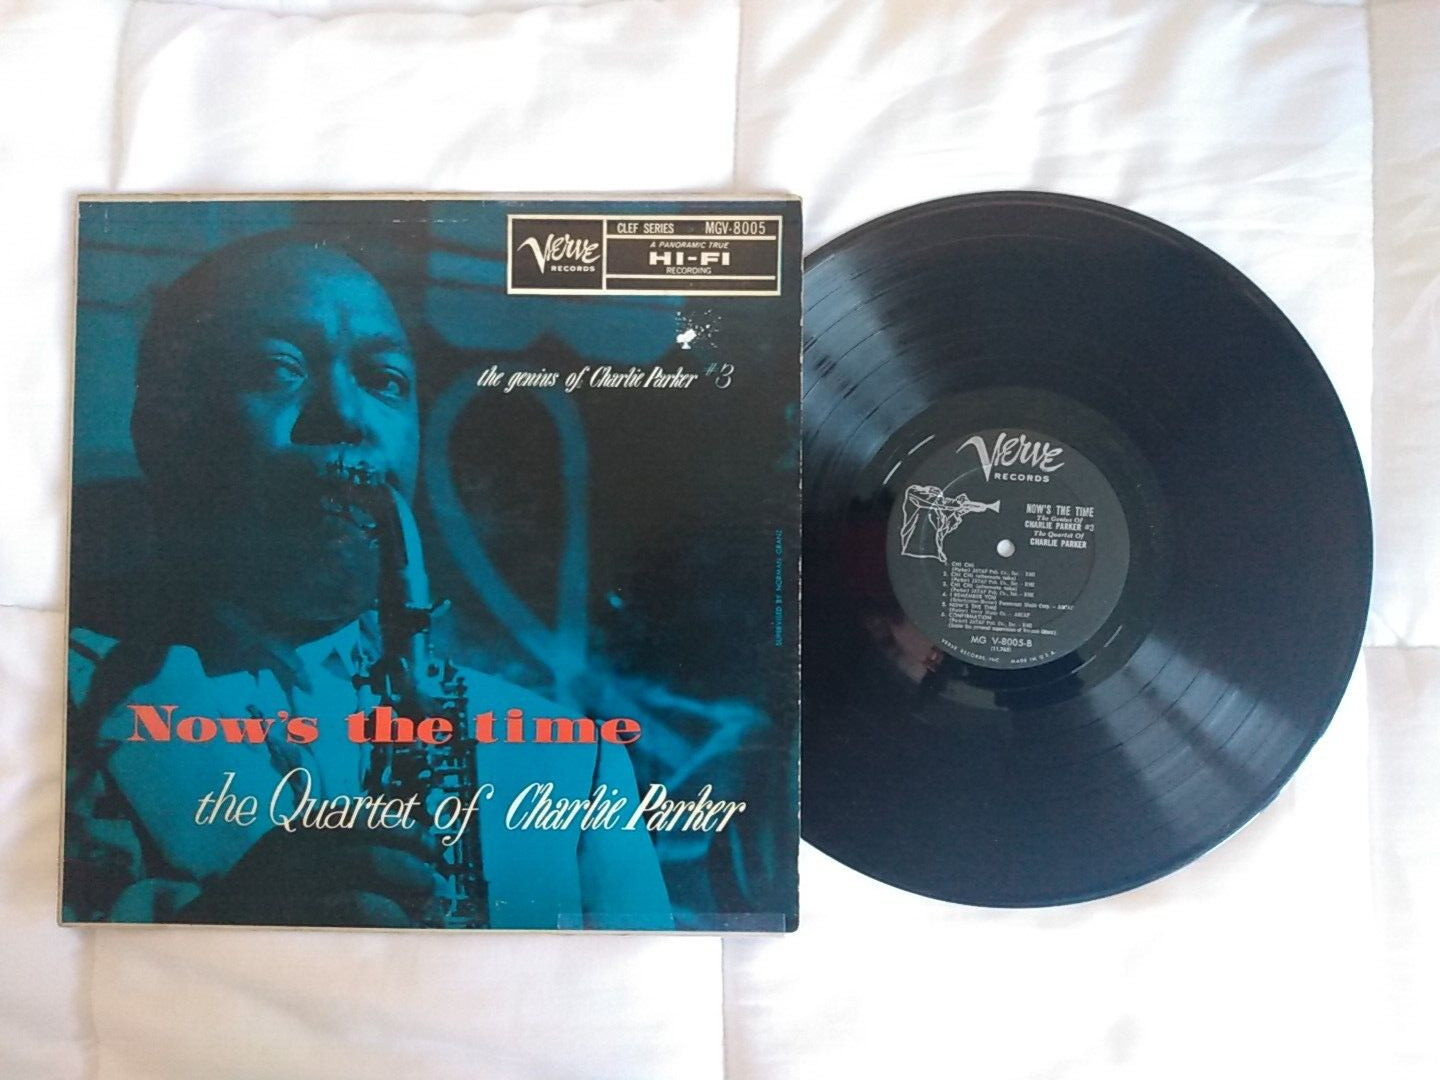 The Quintet Of Charlie Parker - Now's The Times LP Verve 1957 MGV 8005 VG/VG  